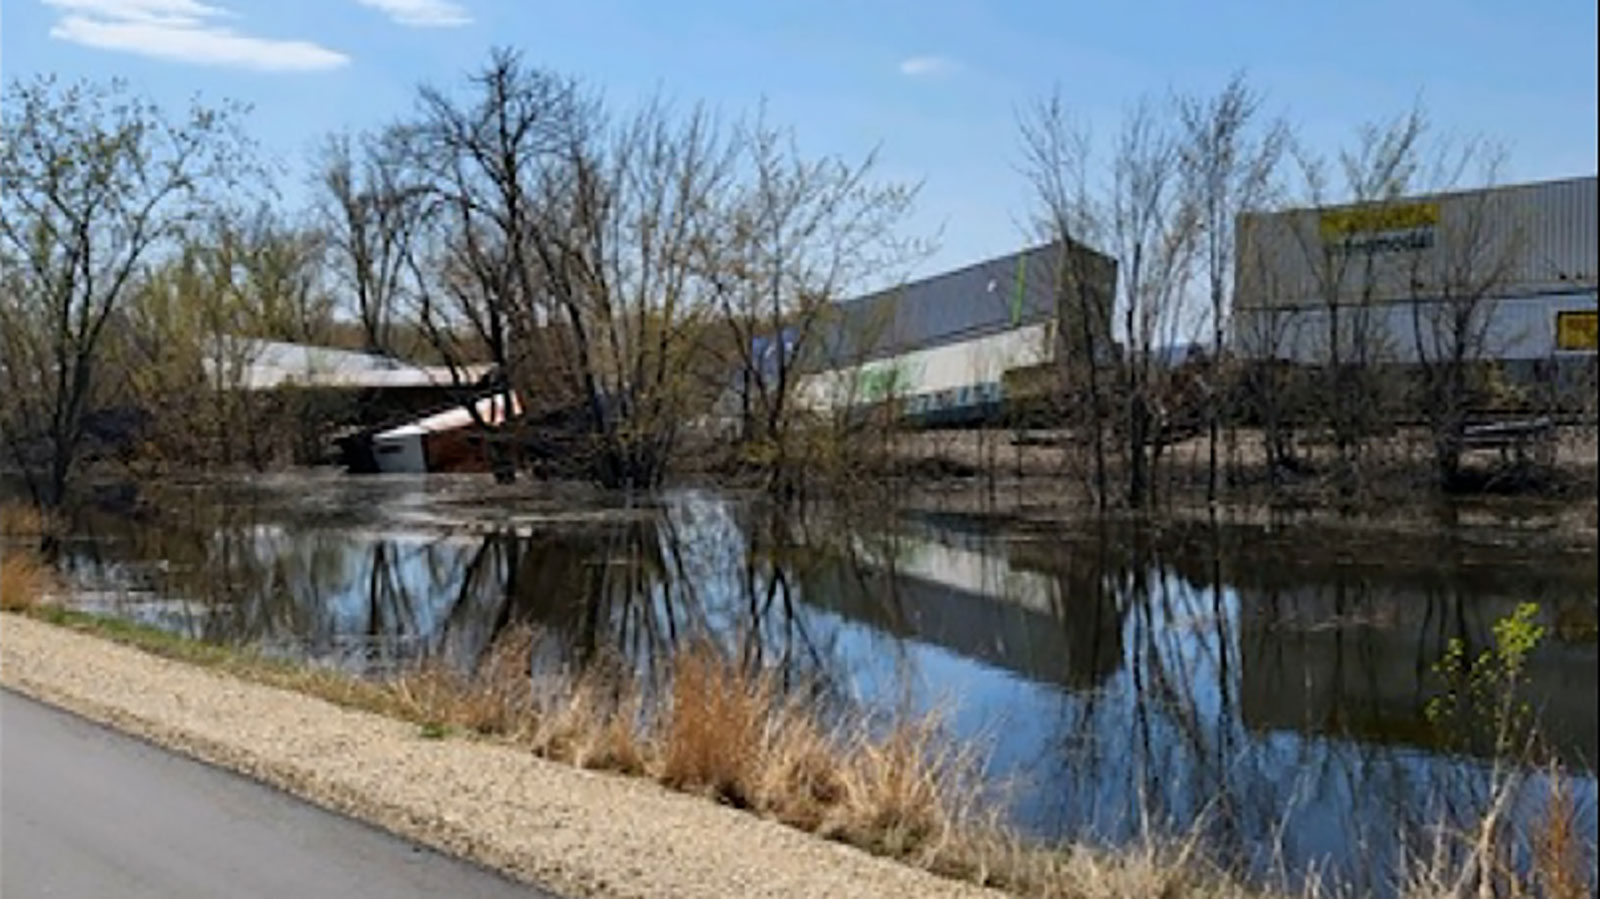 Train cars fell into the Mississippi River in Wisconsin after a train derailed on April 27....